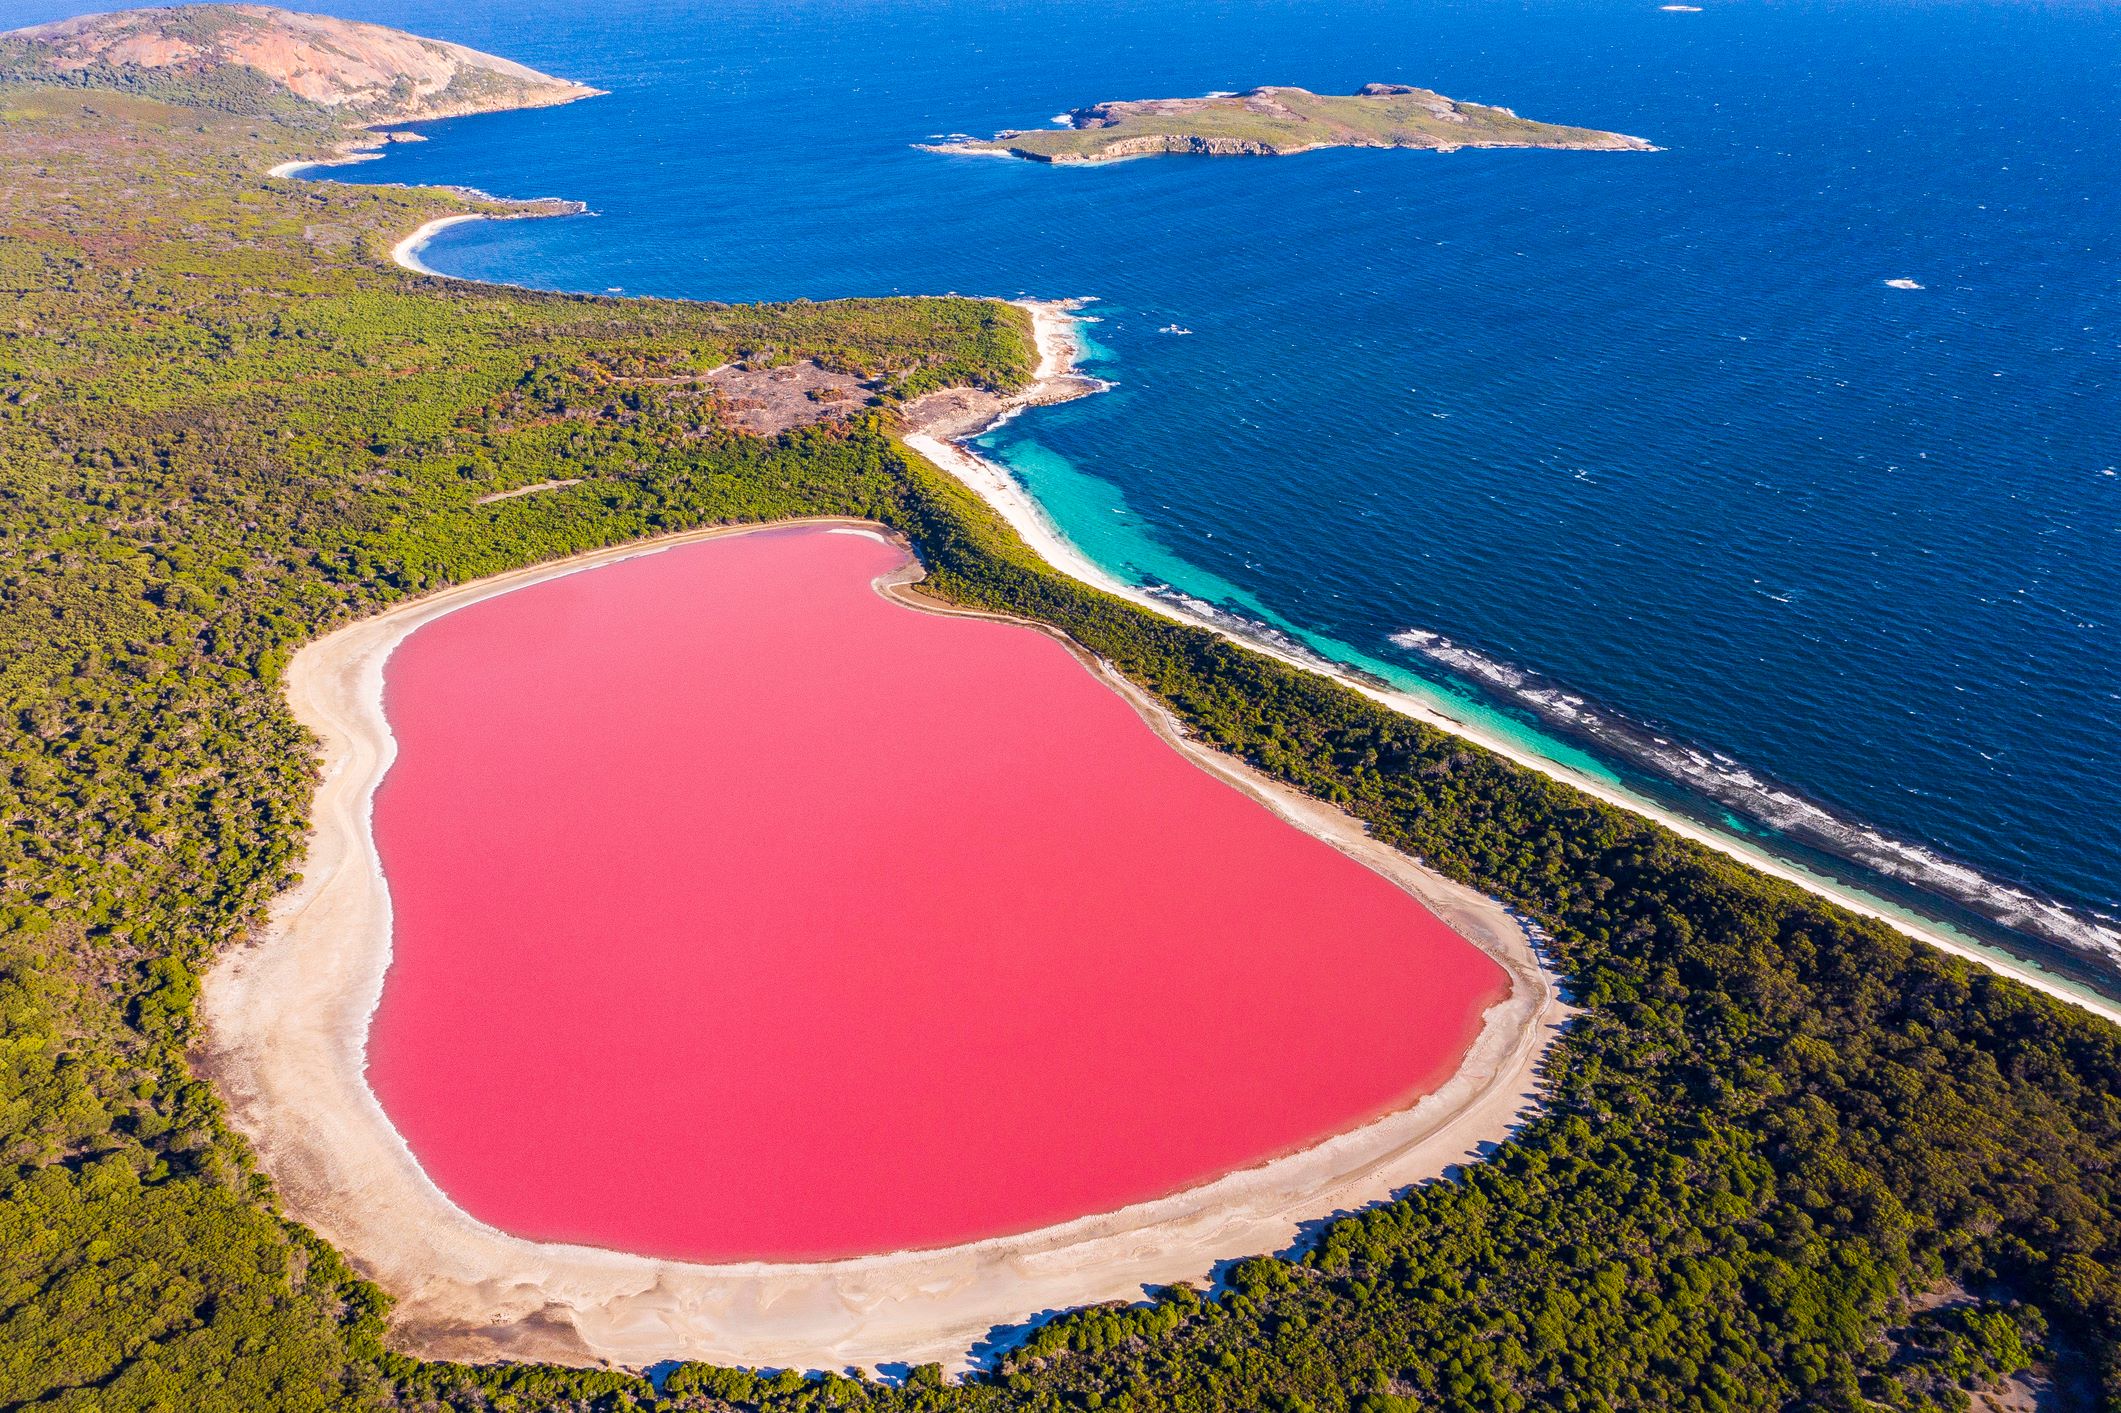 The sight of this pink lake will take your breath away